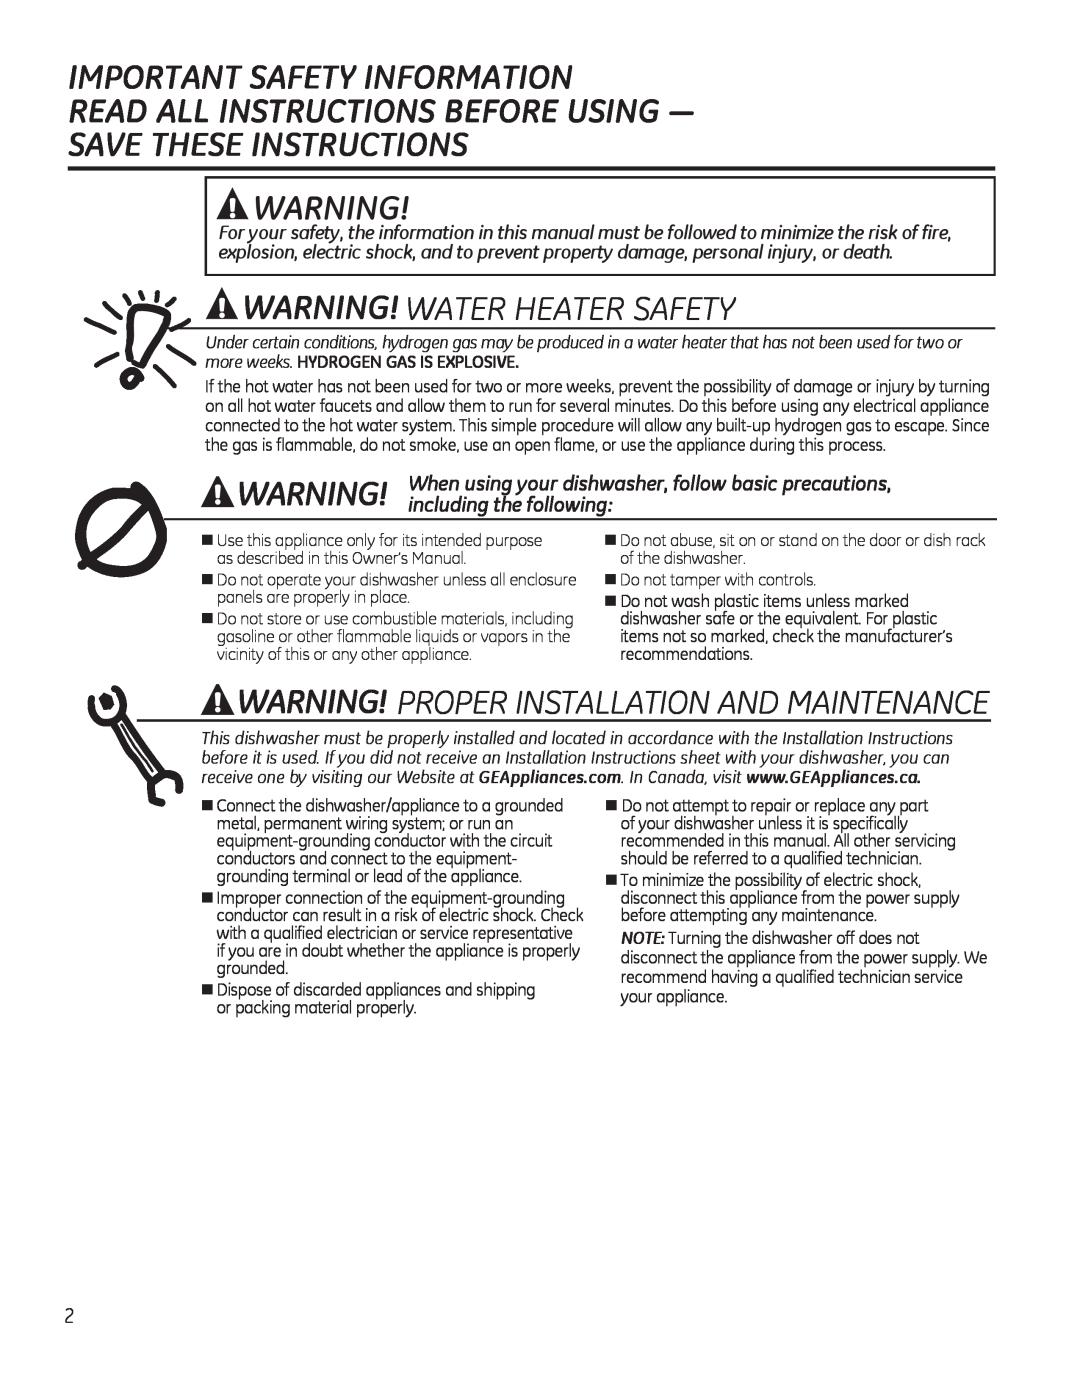 GE GDF530-550 Series manual IMPORTANT SAFETY INFORMATION 5$$//,16758&7,216%2586,1*³, Save These Instructions 